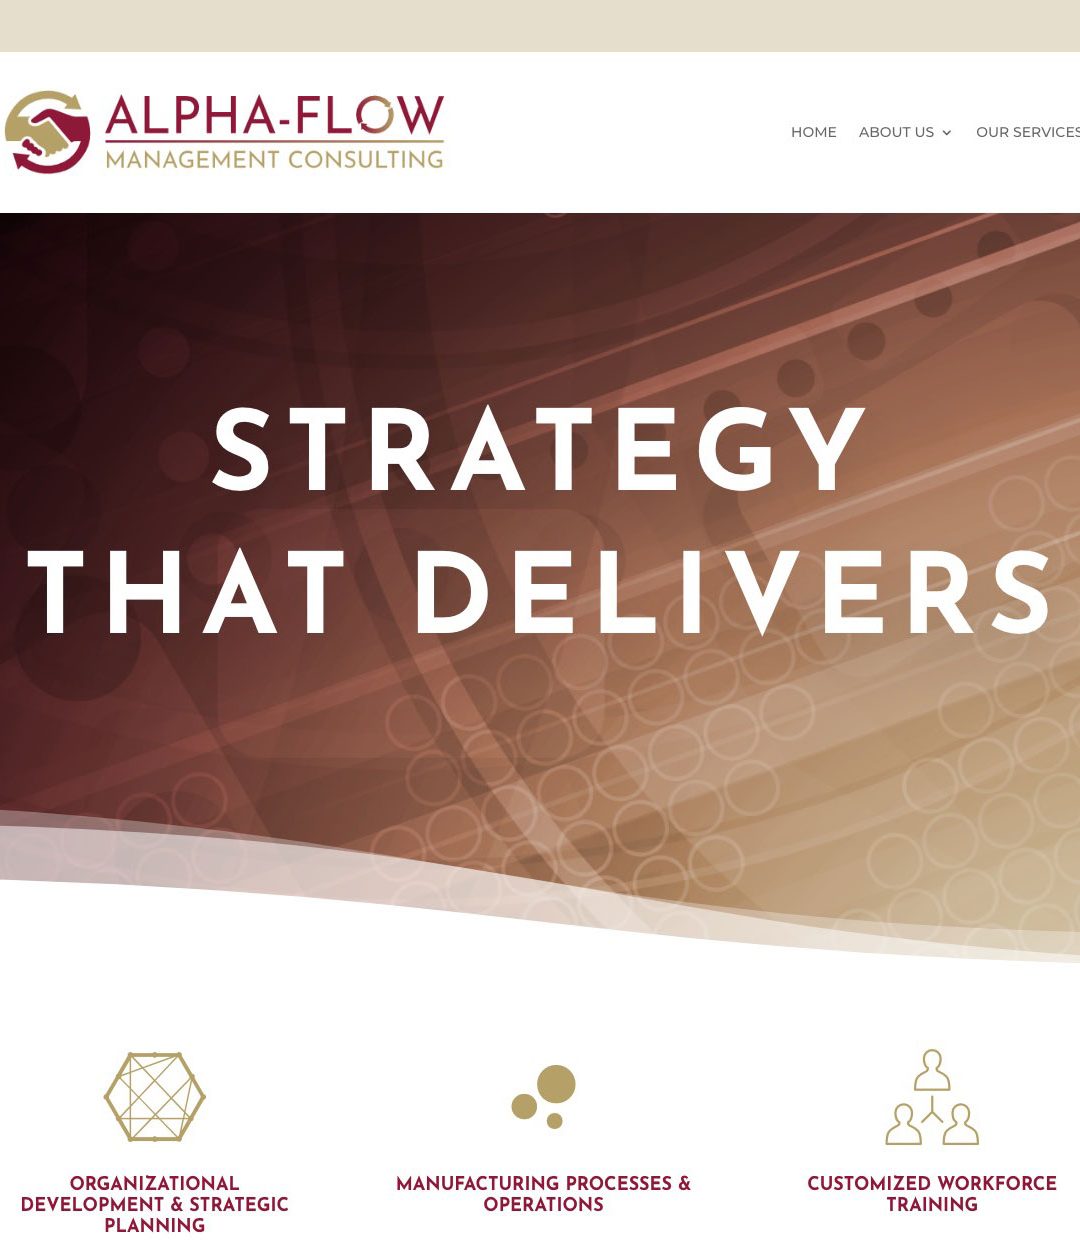 Alpha-Flow Management Consulting